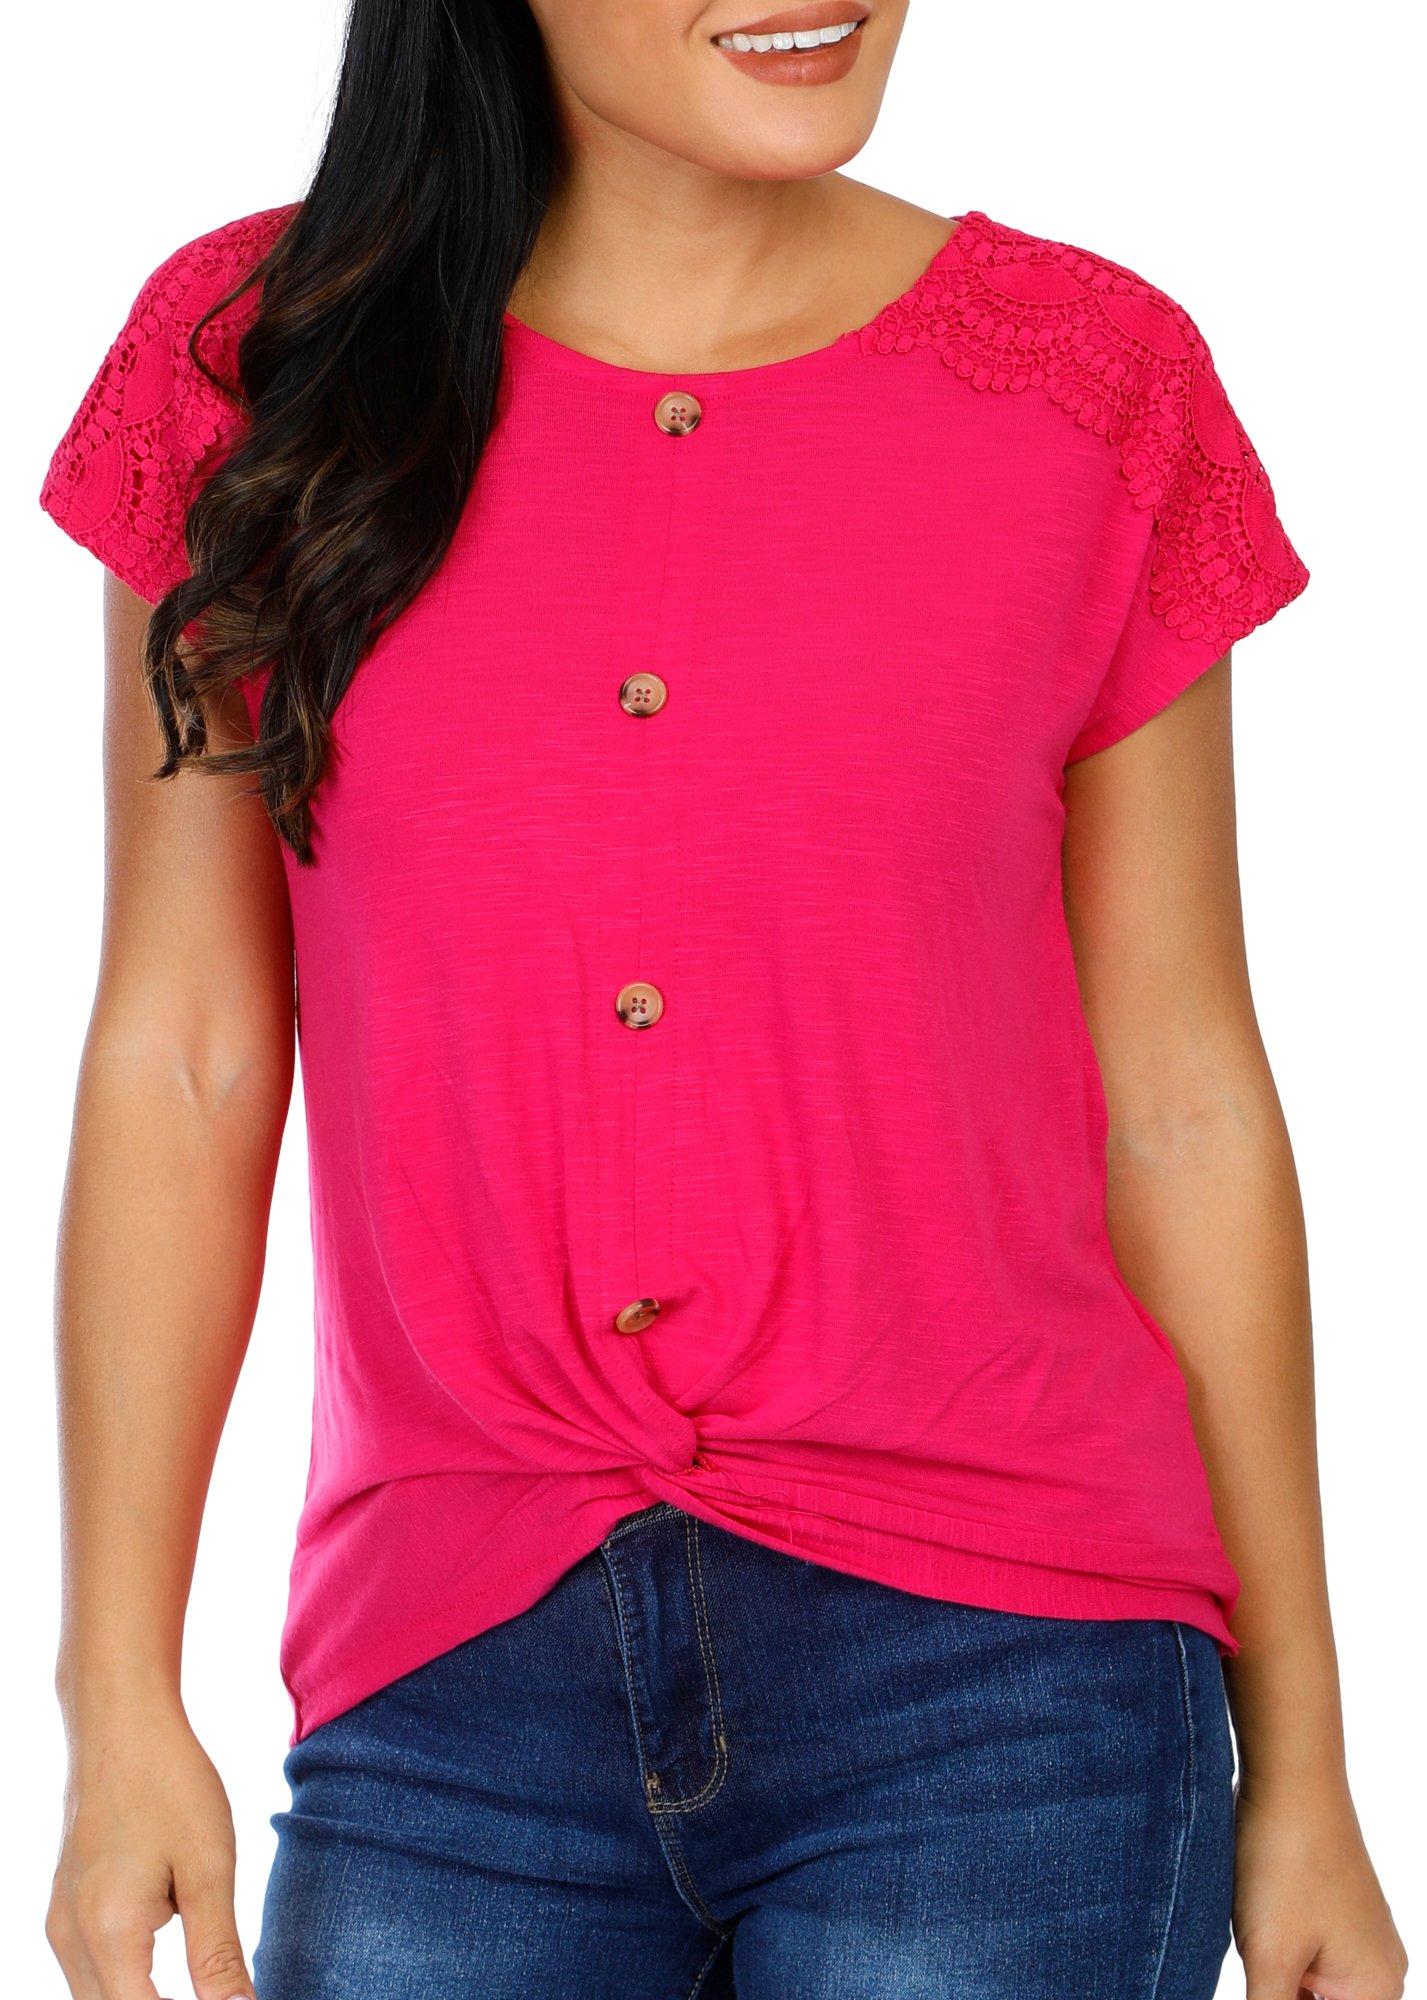 Women's Solid Knit Top